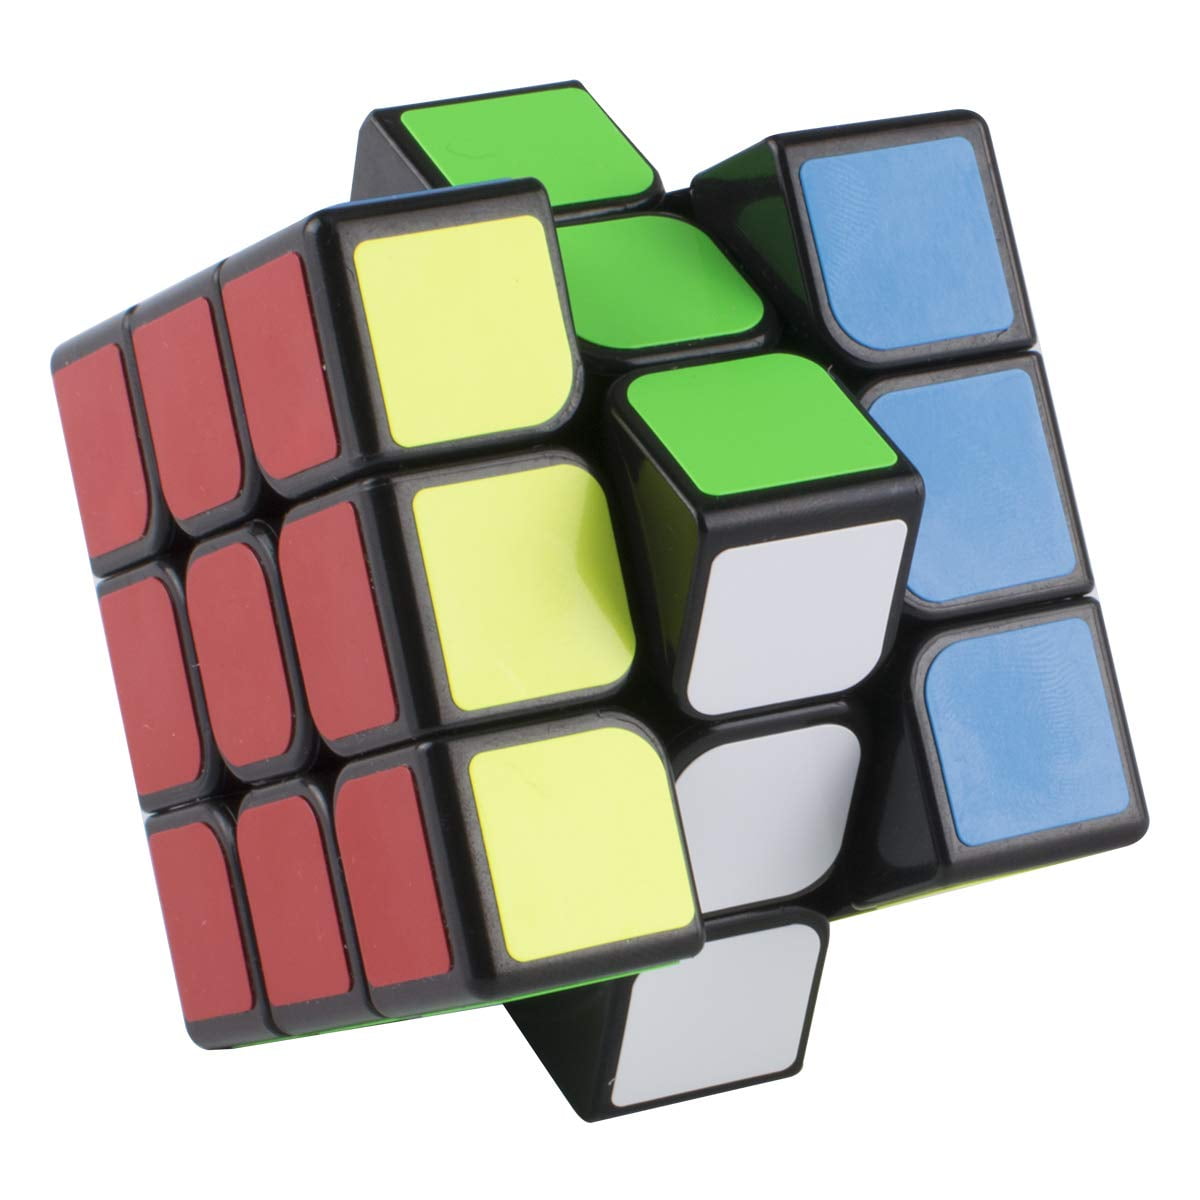 Details about   Rubiks Cube Puzzle Toy Brain Teaser 3x3x3 4x4x4 Magic Cube Pack Speed Cube